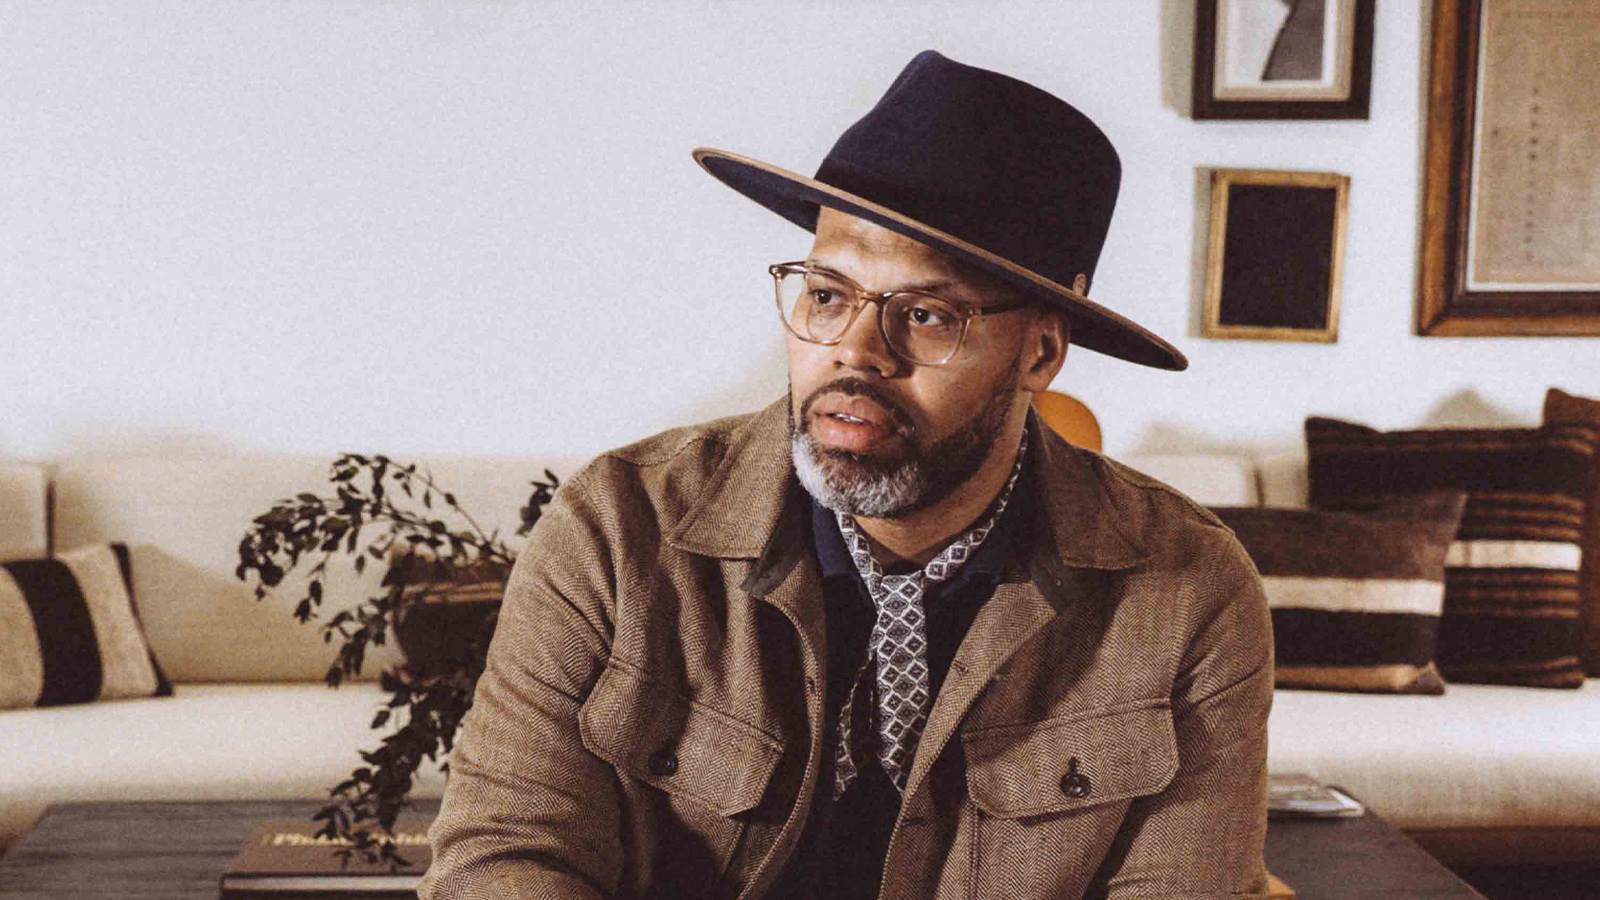 Eric Roberson is wearing a large, brown, brimmed hat and clear glasses. He looks off to the side and is sitting infront of a wood coffee table and white couch with pillows. 